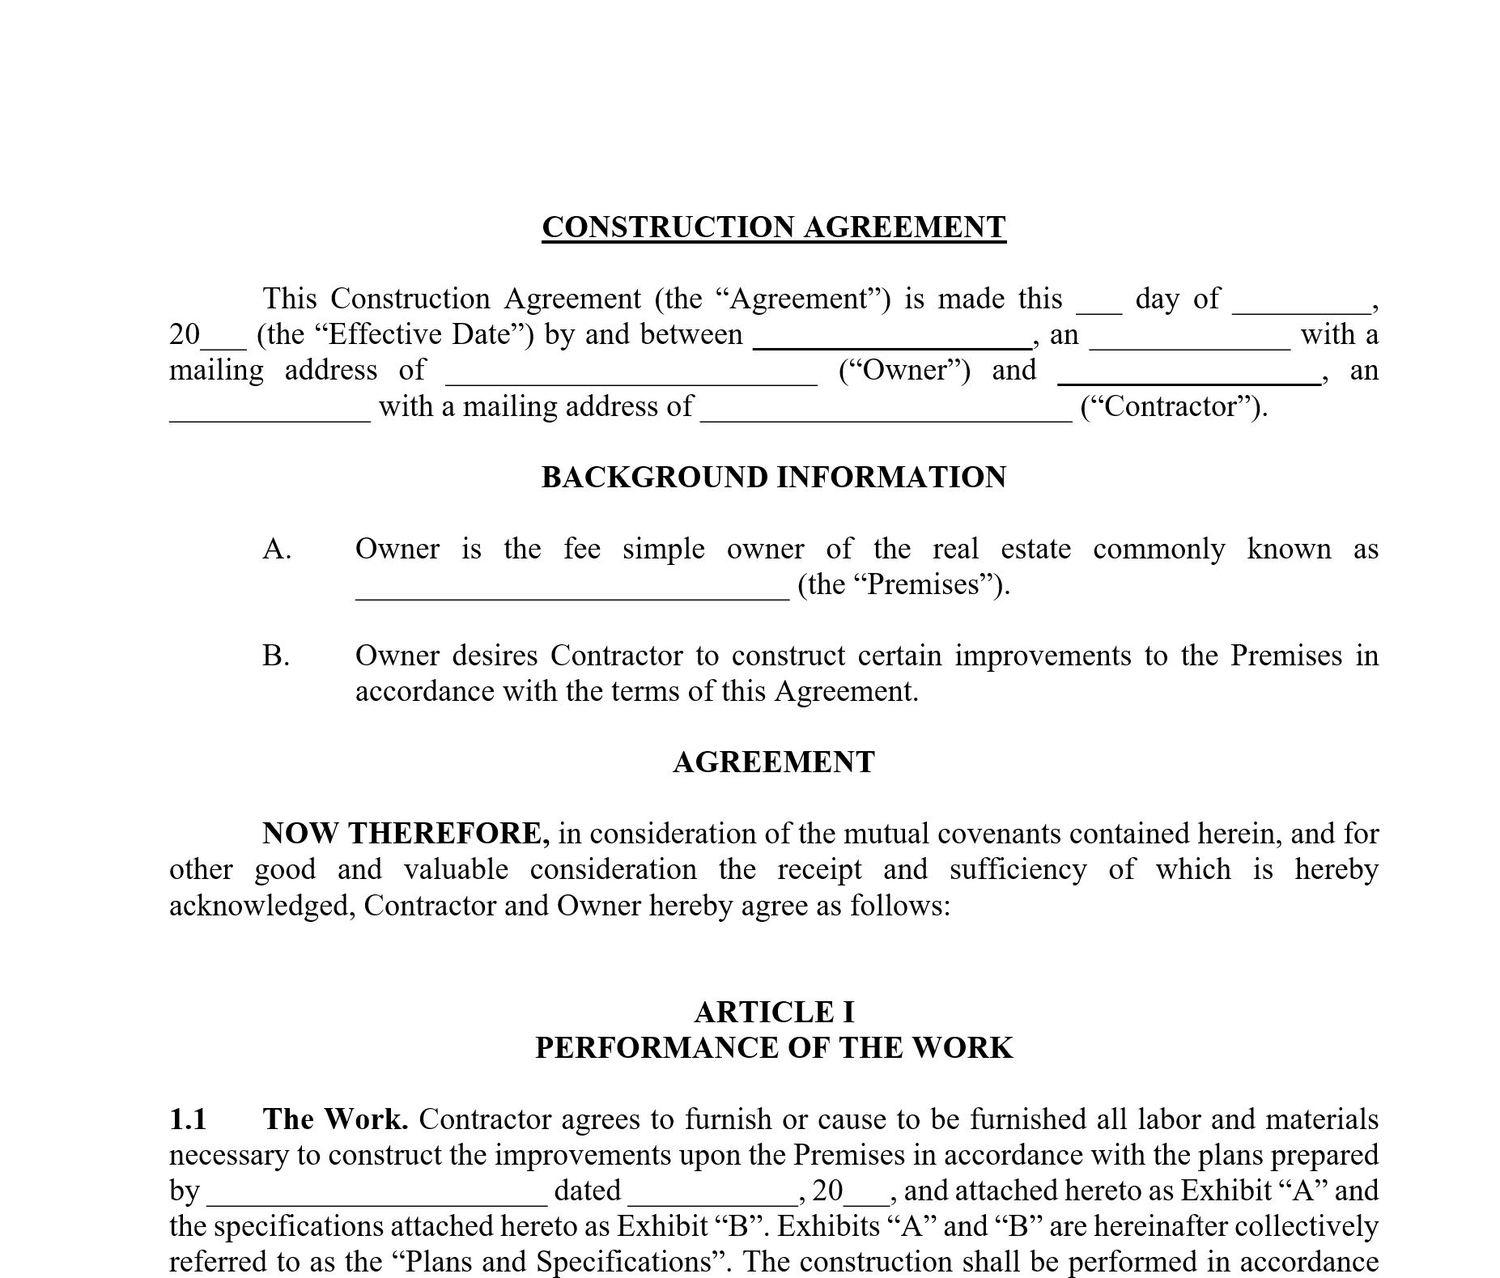 Construction Contract Template - ApproveMe - Free Contract Templates Inside conflict resolution agreement template